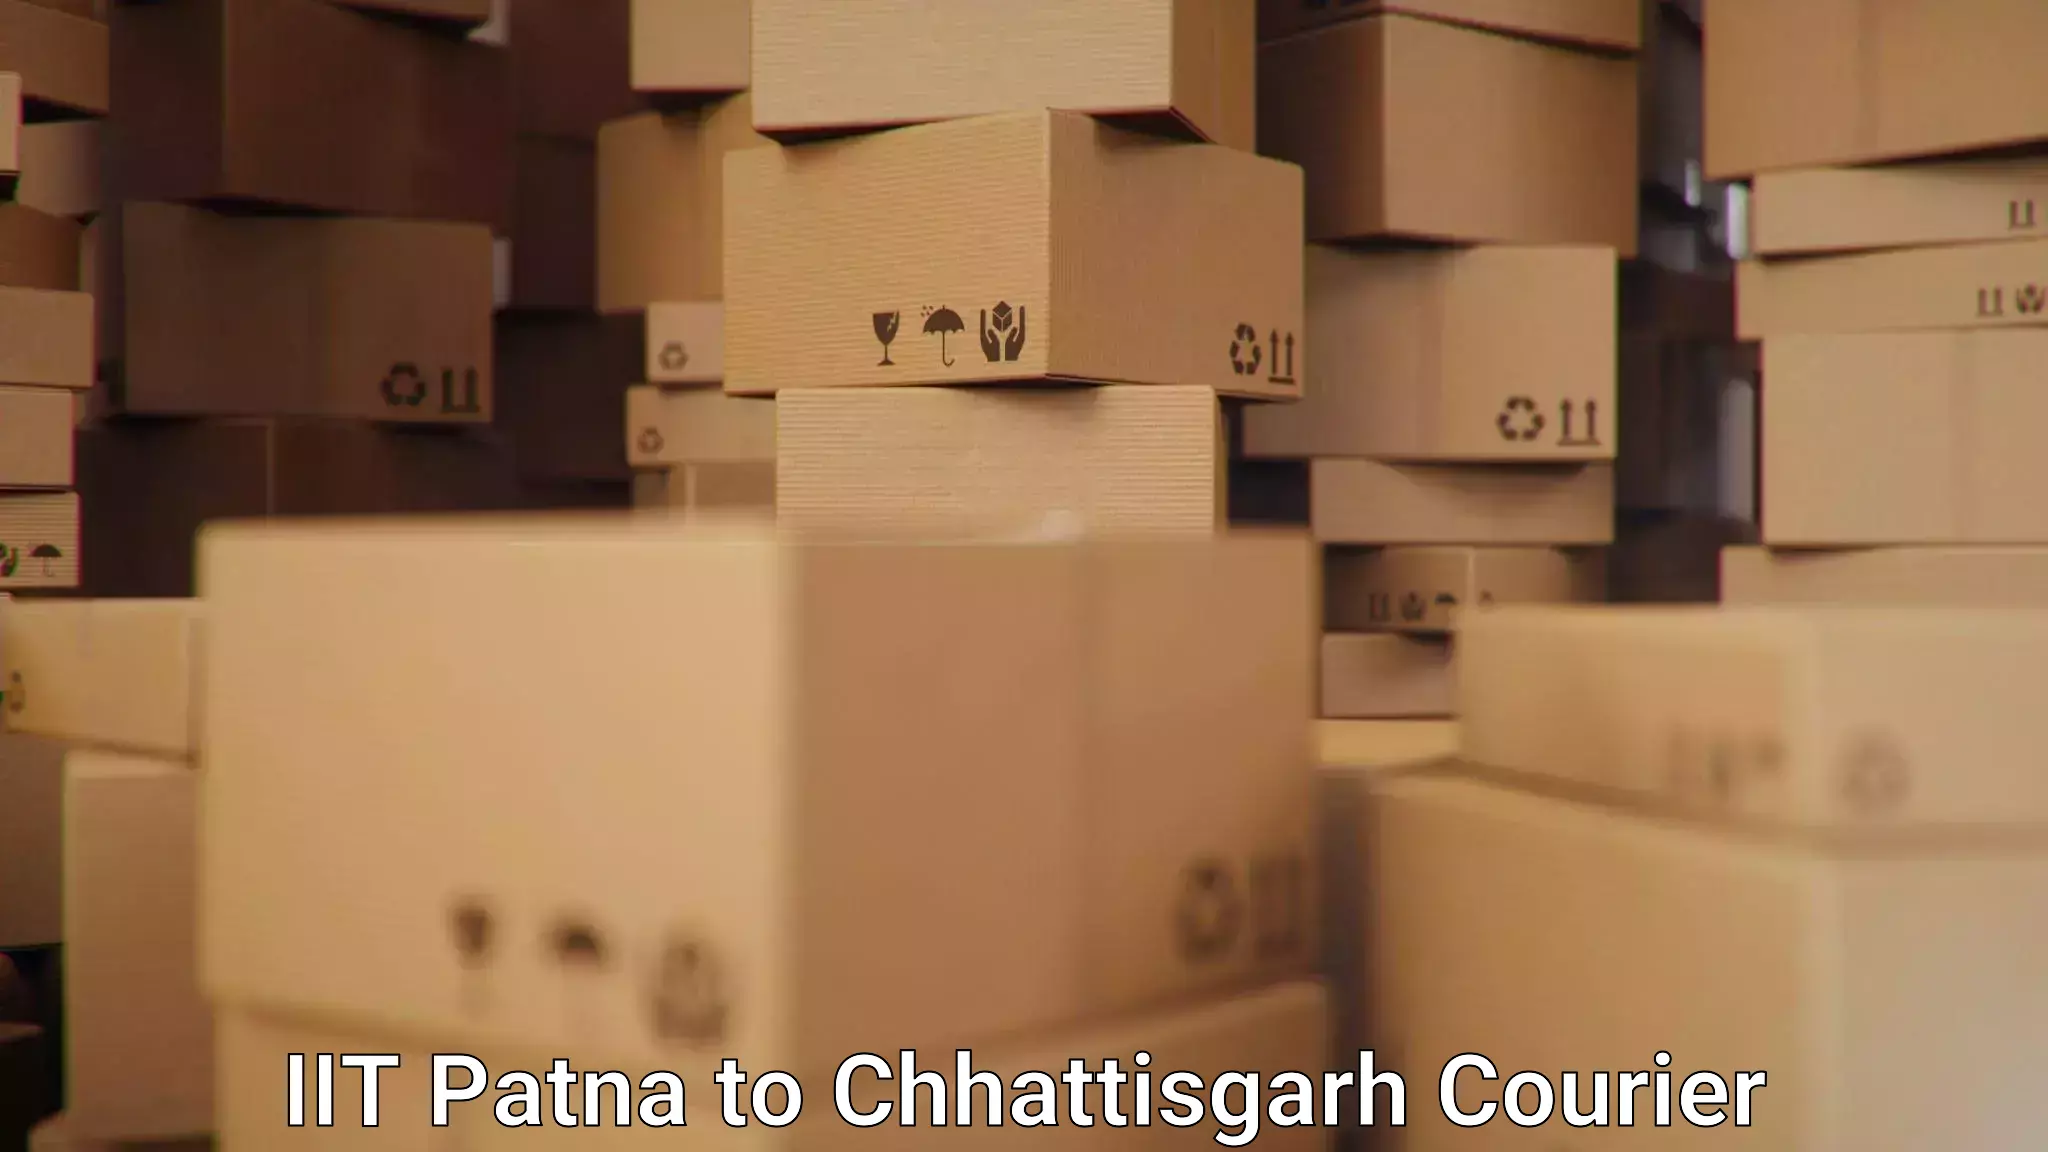 State-of-the-art courier technology IIT Patna to Durg